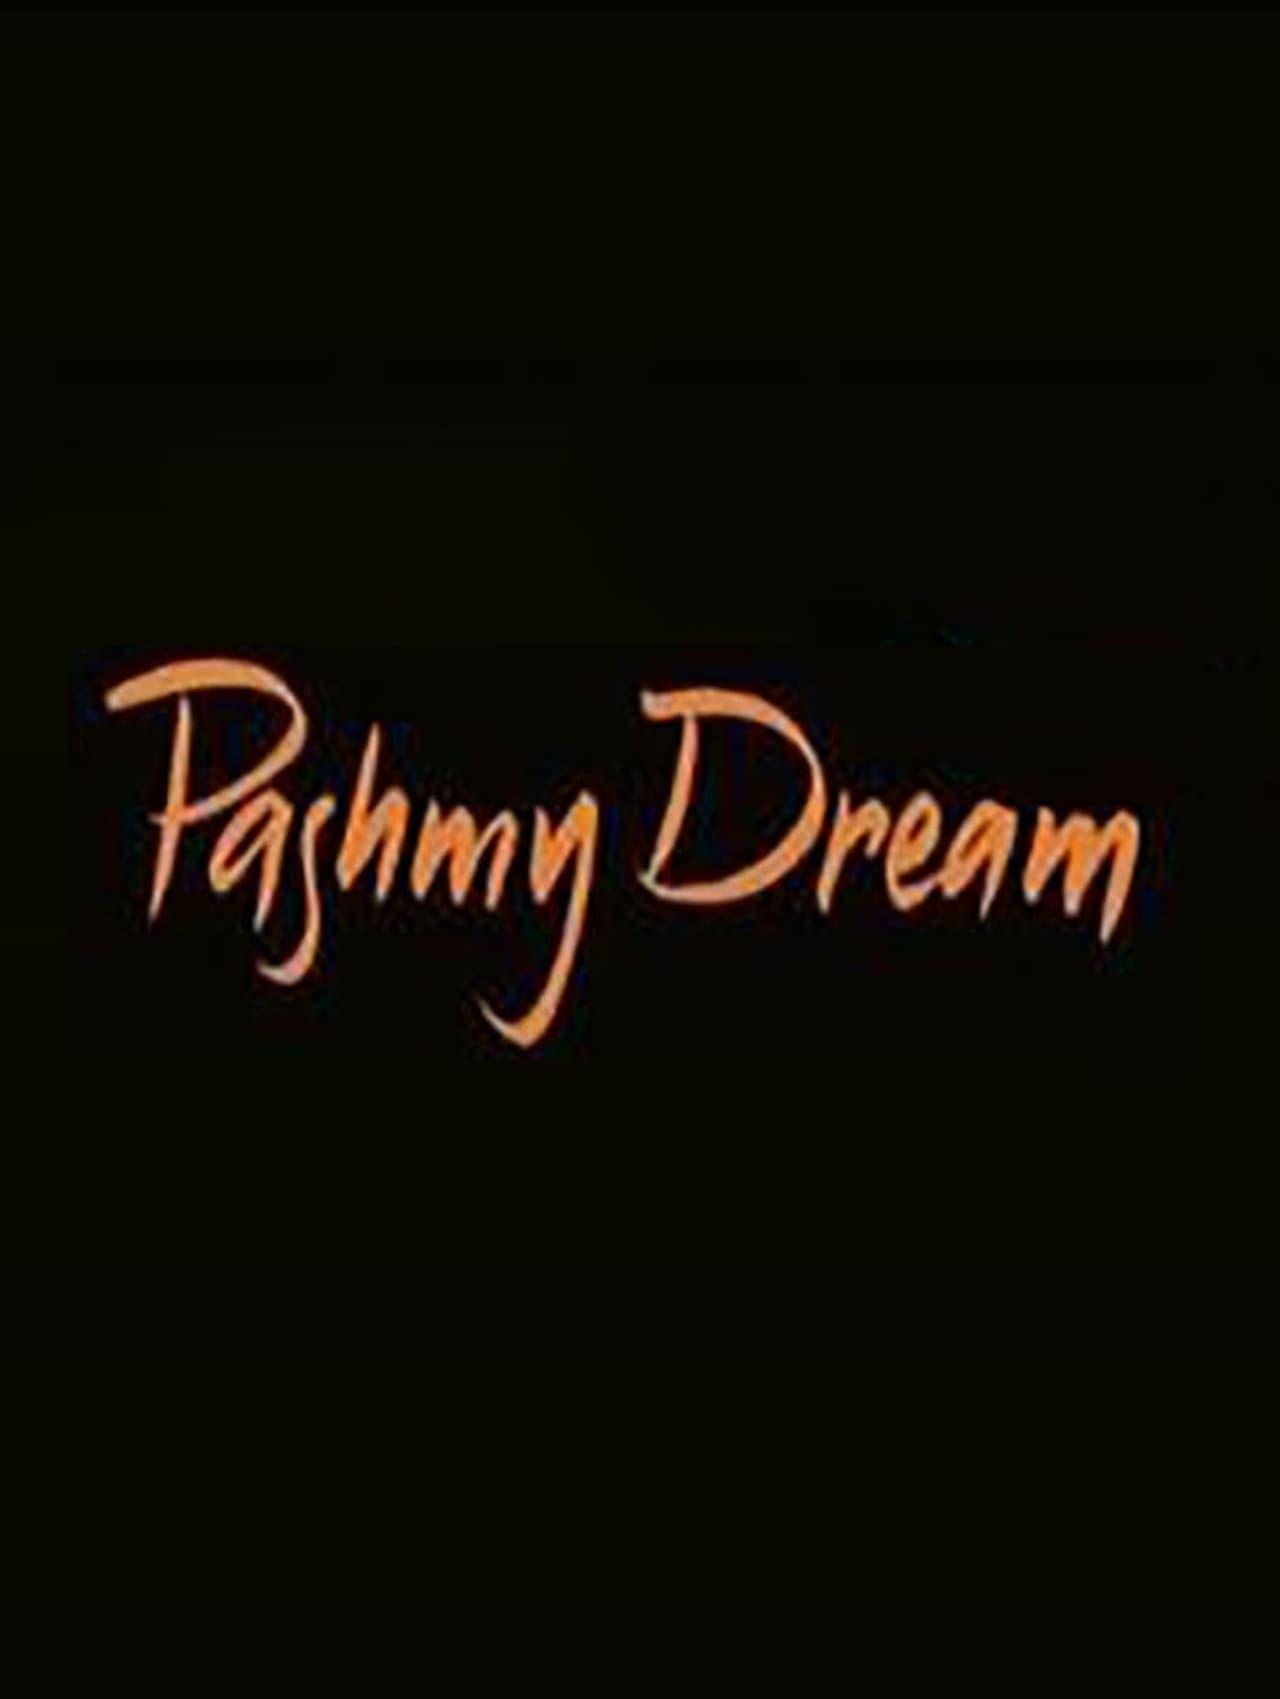 Pashmy Dream poster